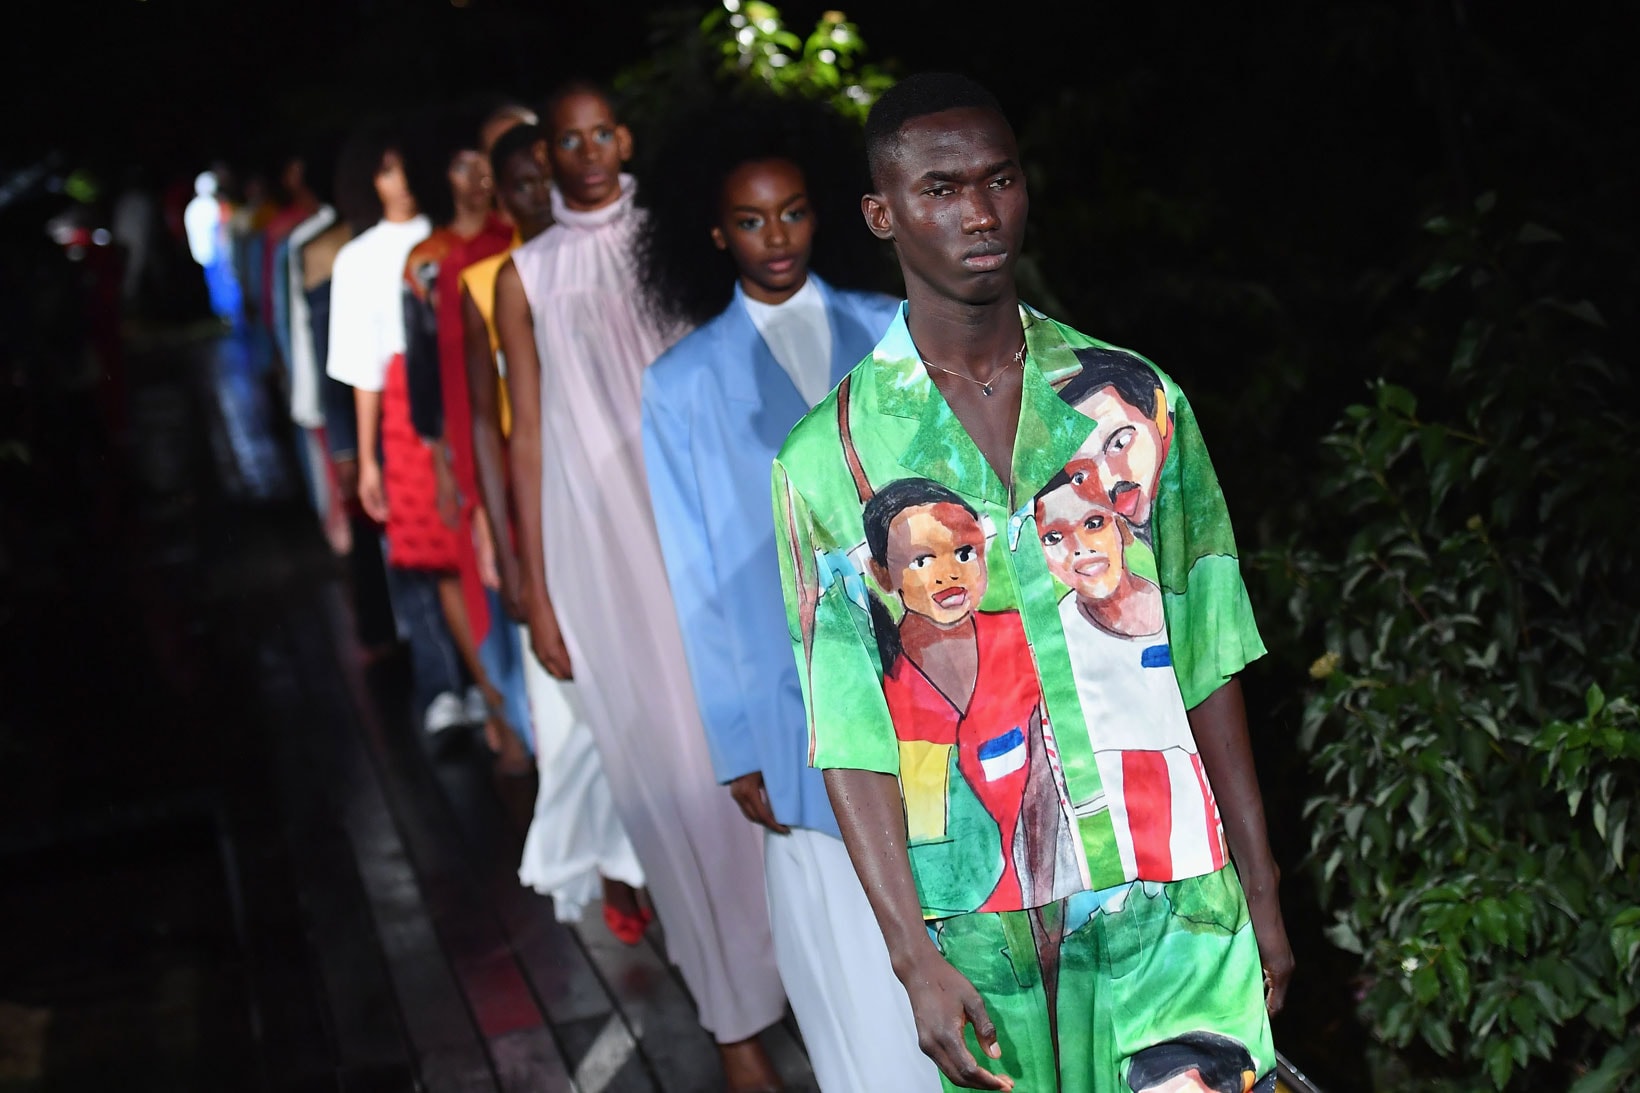 Pyer Moss Spring/Summer 2019 Show New York Fashion Week Collection